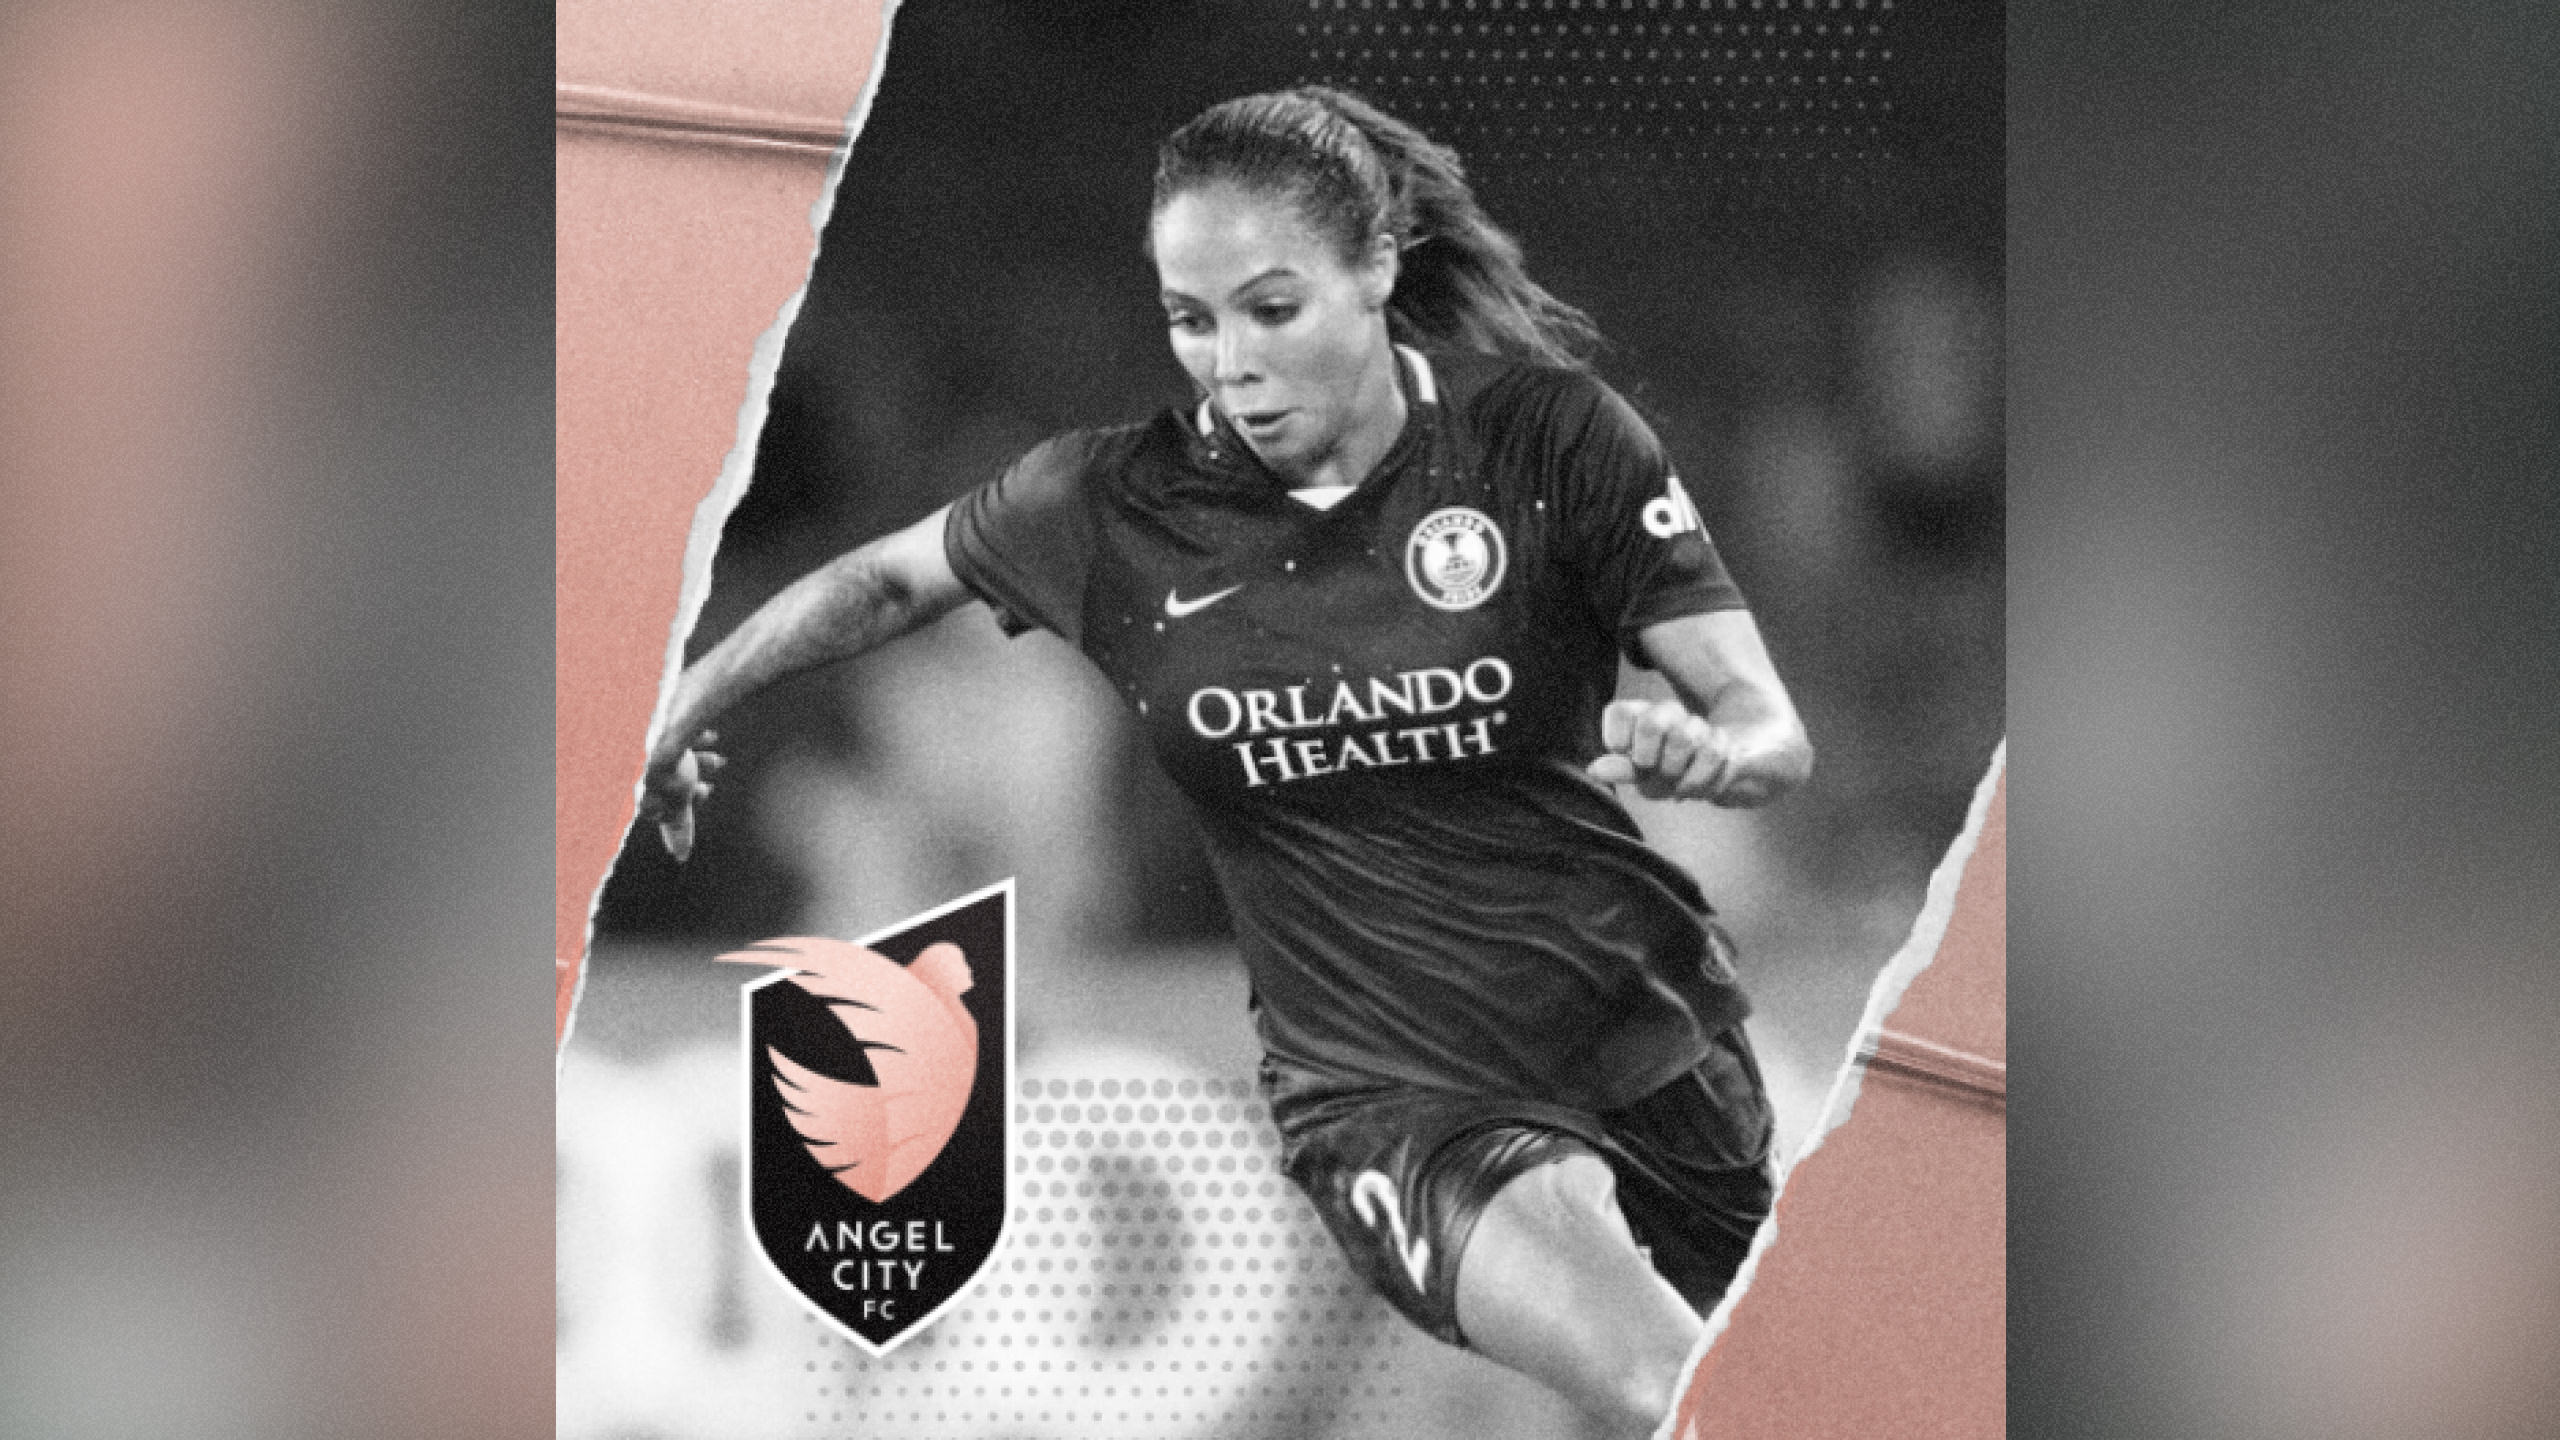 Sydney Leroux’s trade gives Angel City playoff hope - The Gaming Society